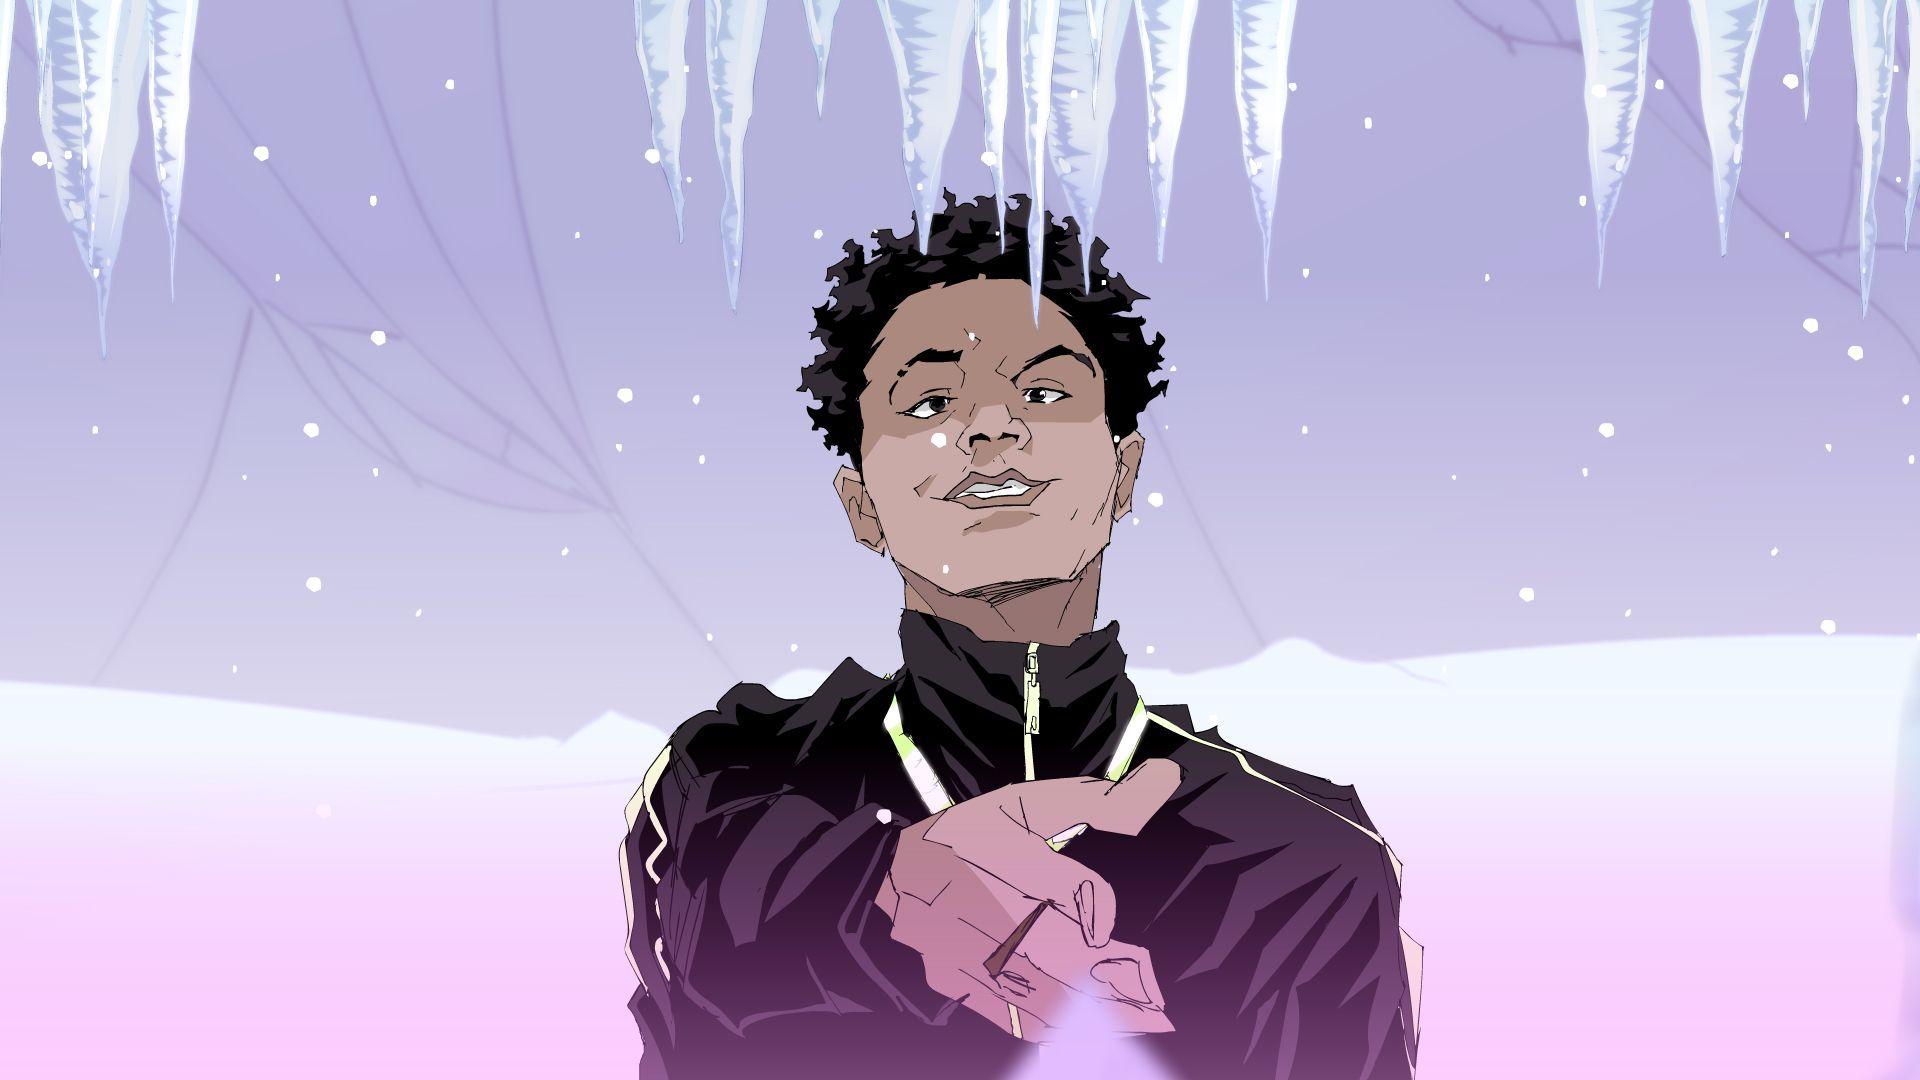 Lil Mosey Anime Wallpapers - Wallpaper Cave